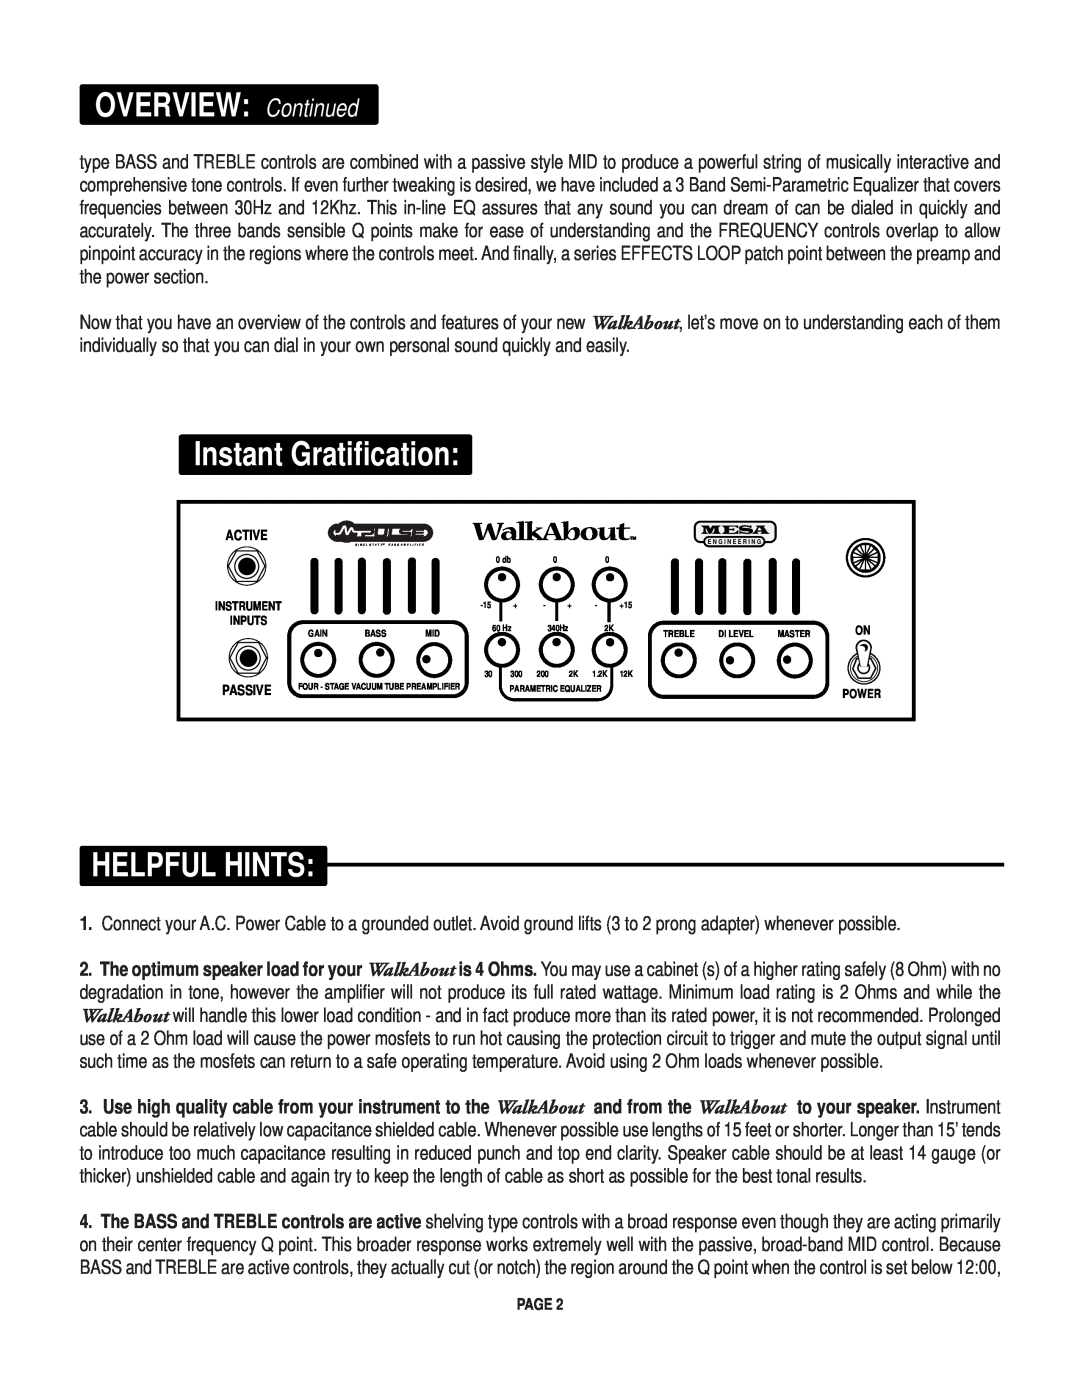 Mesa/Boogie Walk About Bass Amplifier owner manual OVERVIEW Continued, Instant Gratification, Helpful Hints, Page 